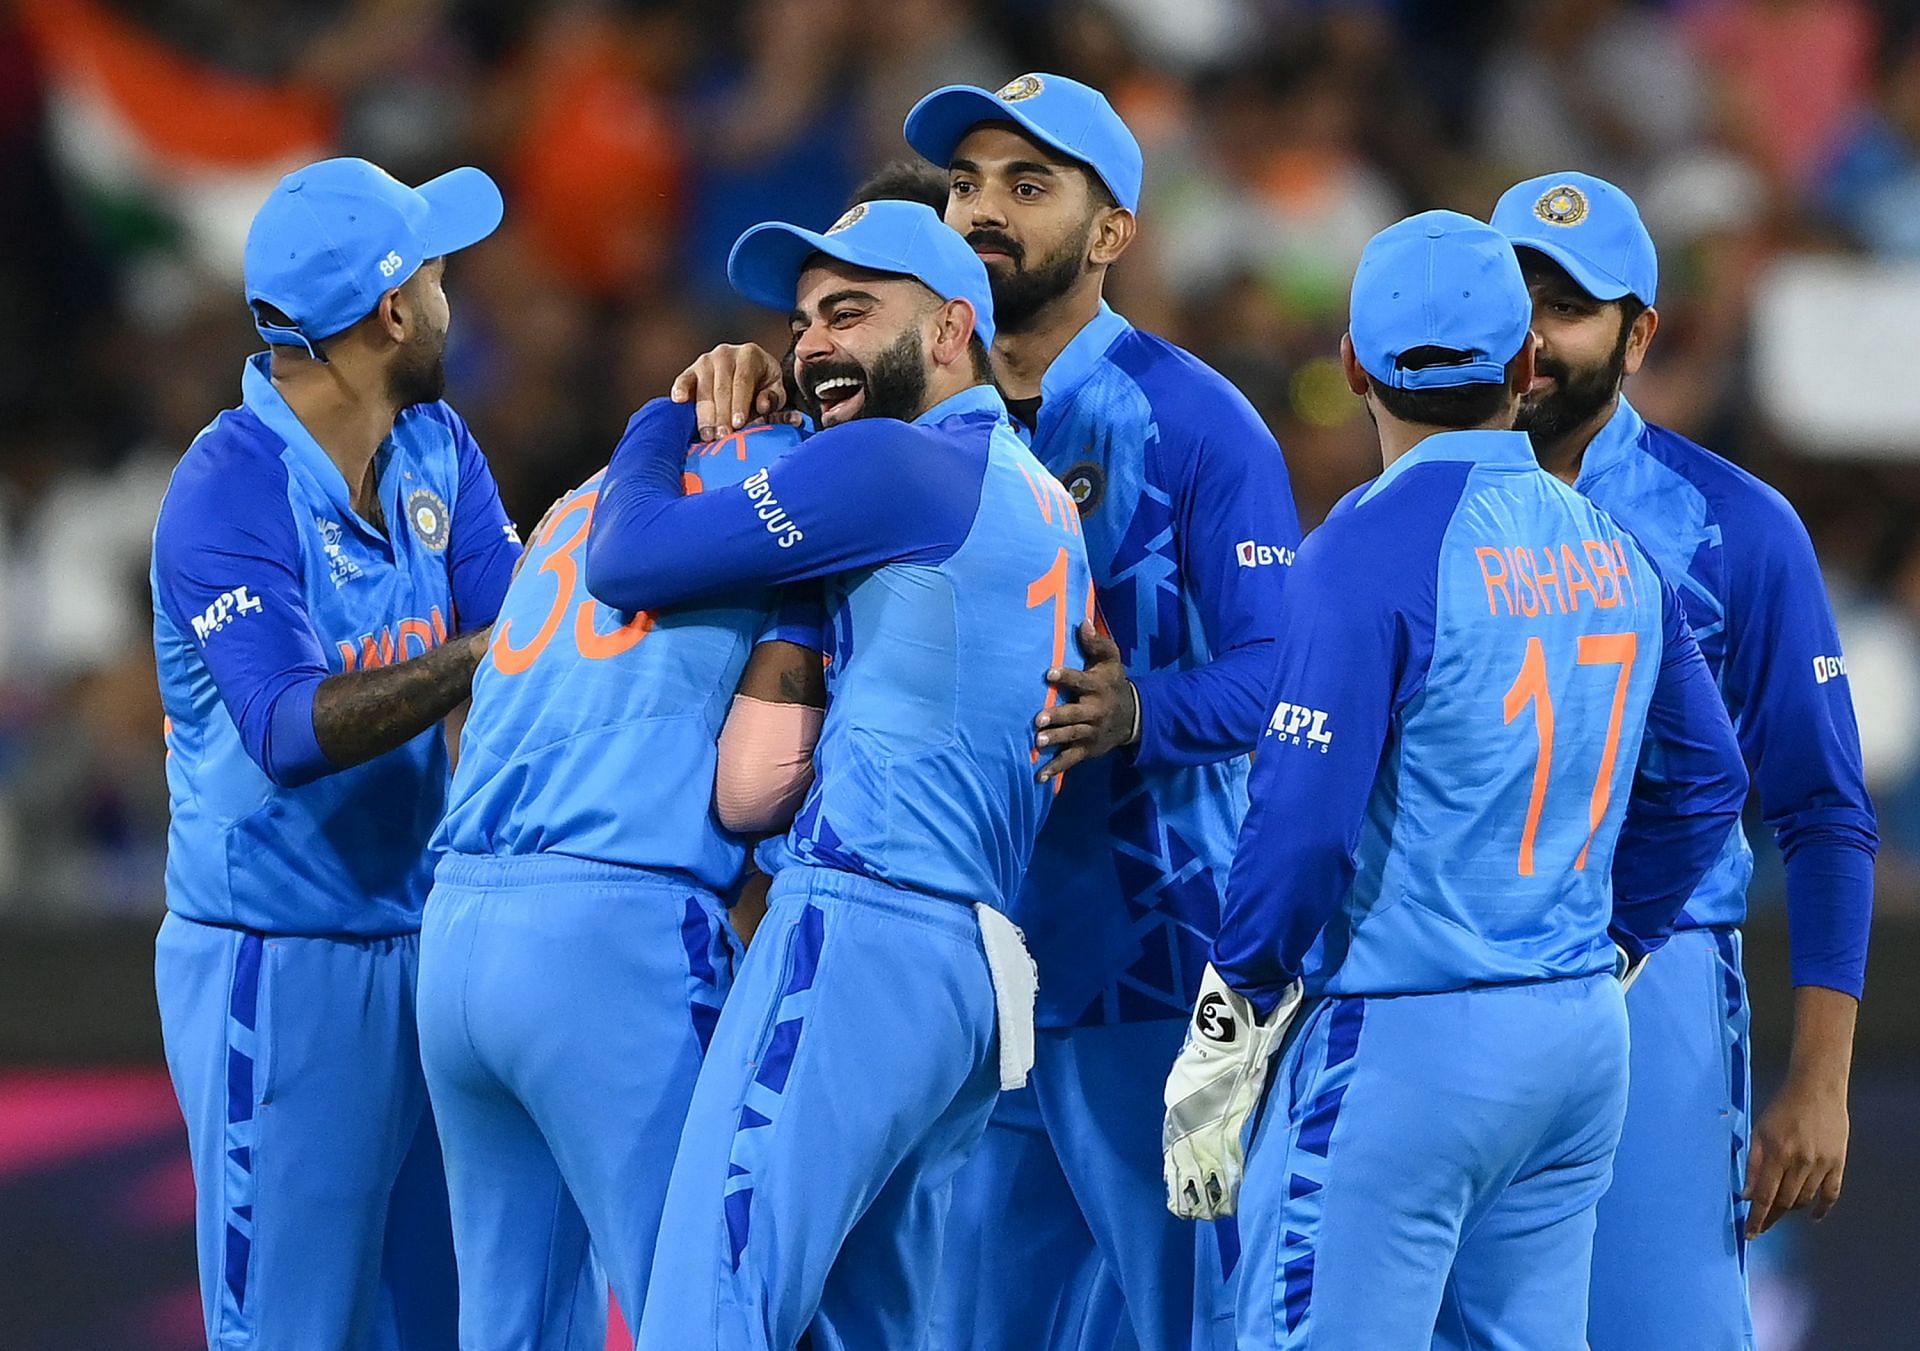 India was the only team to win four games in the Super 12 stage of the T20 World Cup.